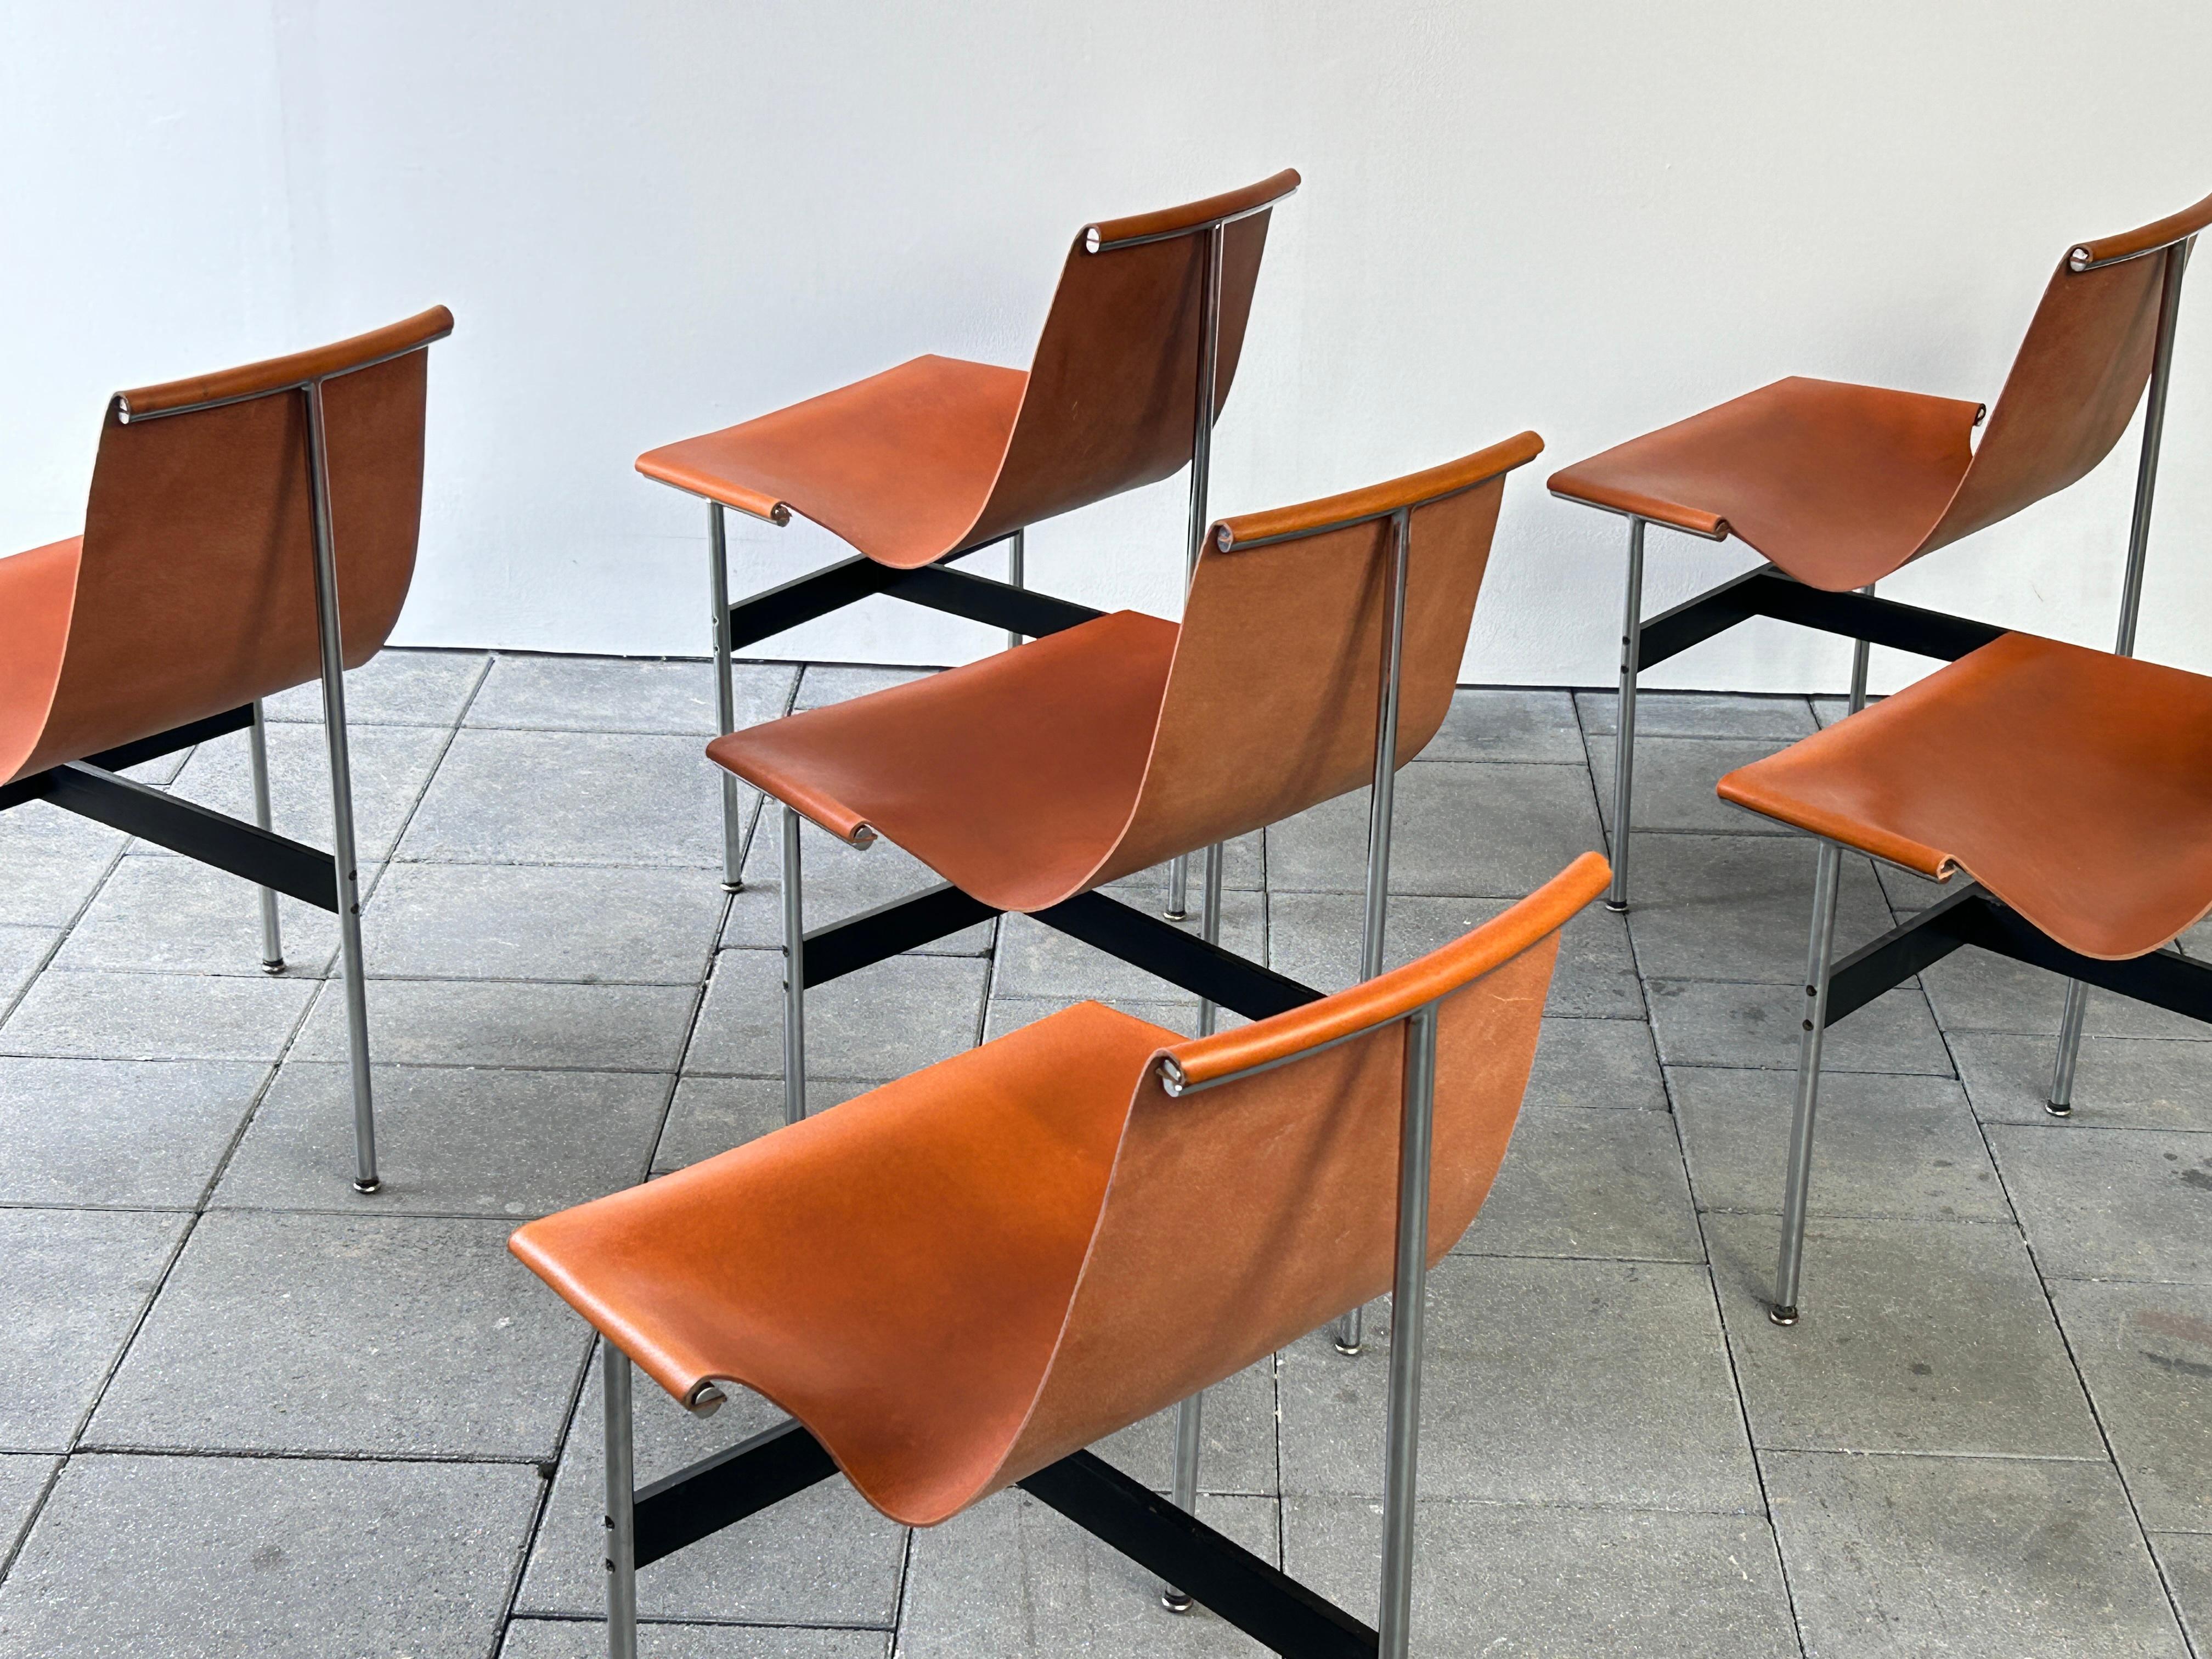 Set of 6 T-chairs designed by Katavolos Litell & Kelley in 1952 For Sale 2